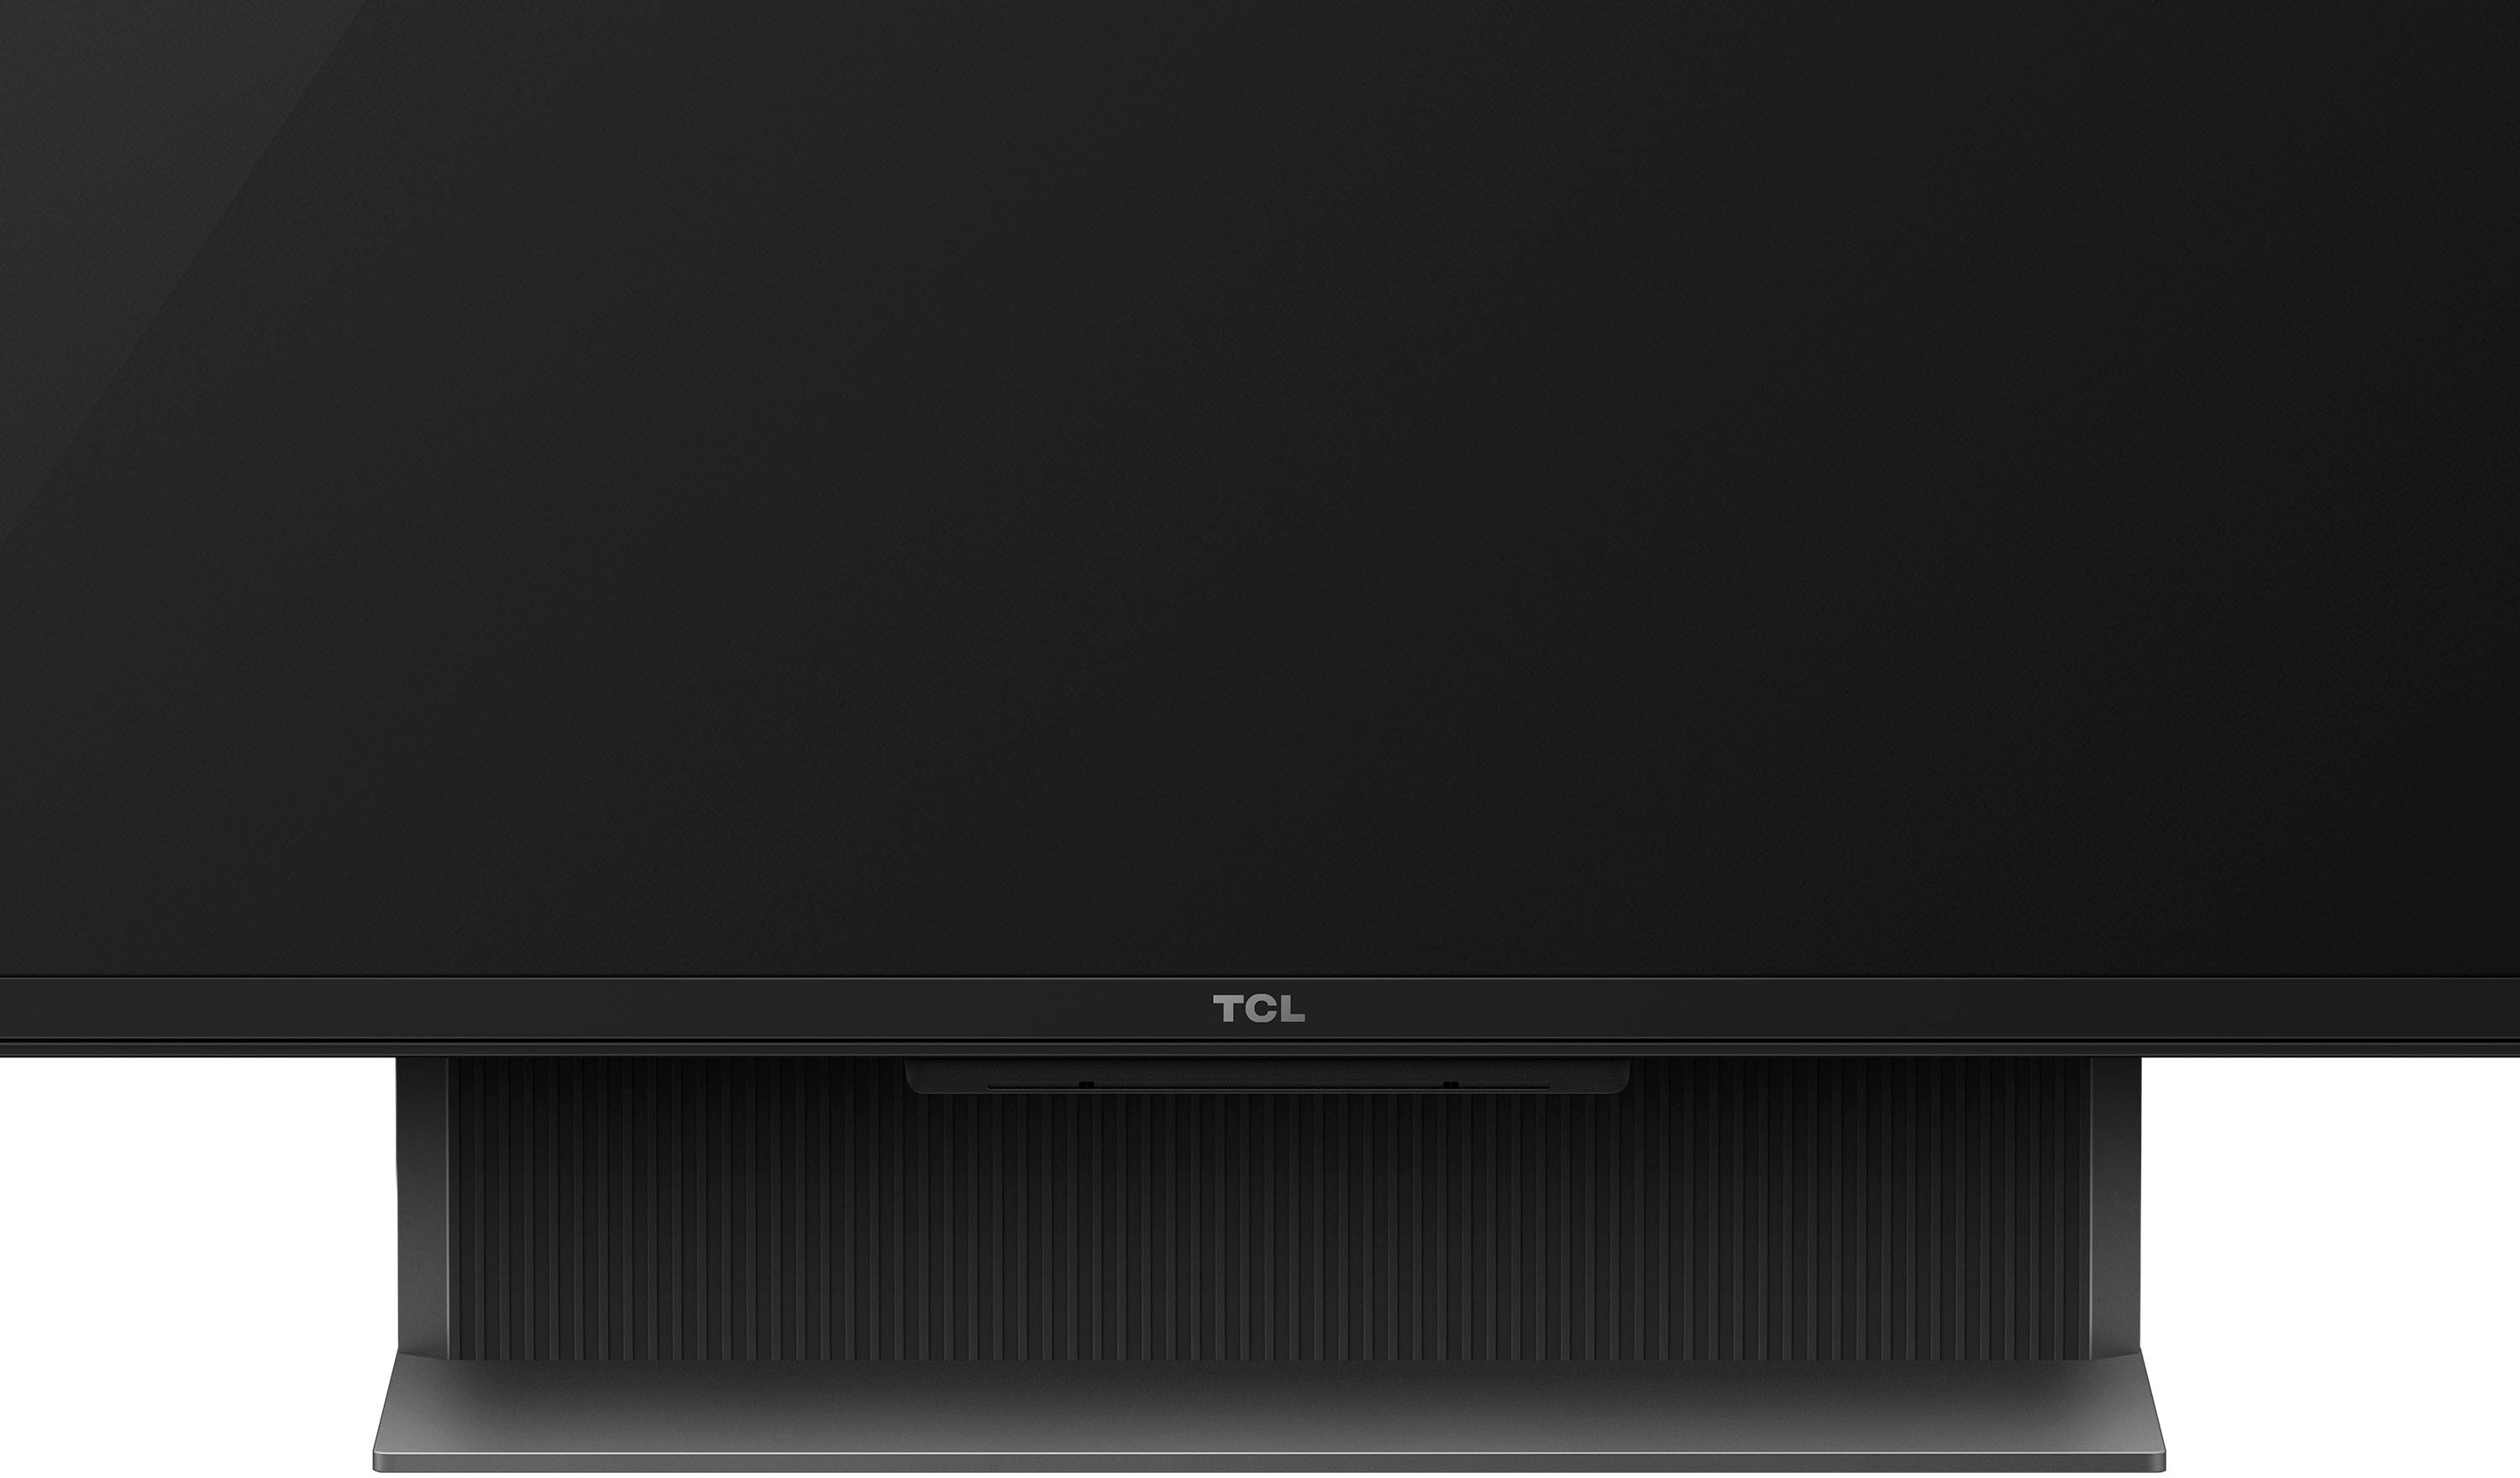 How To Fix a TCL TV with Black Screen